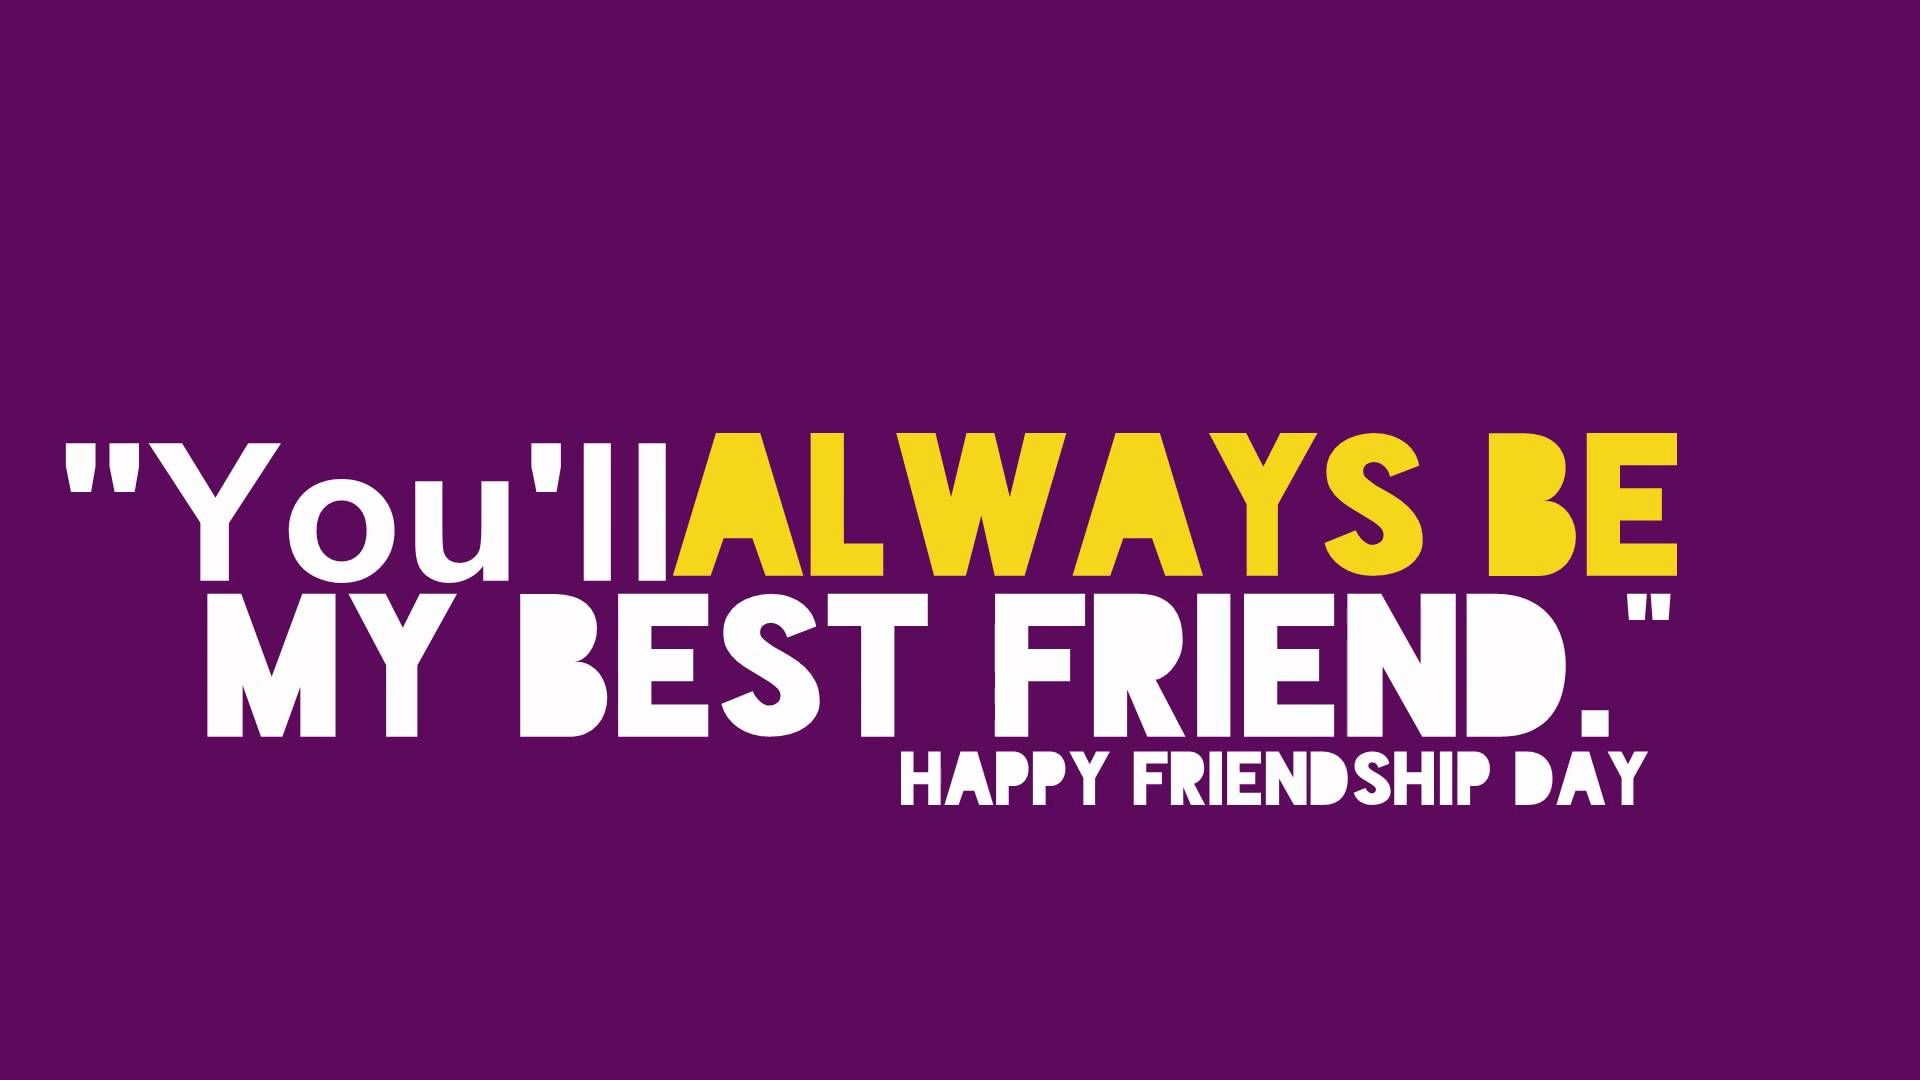 Happy Friendship Day HD Wallpaper. Friendship day quotes